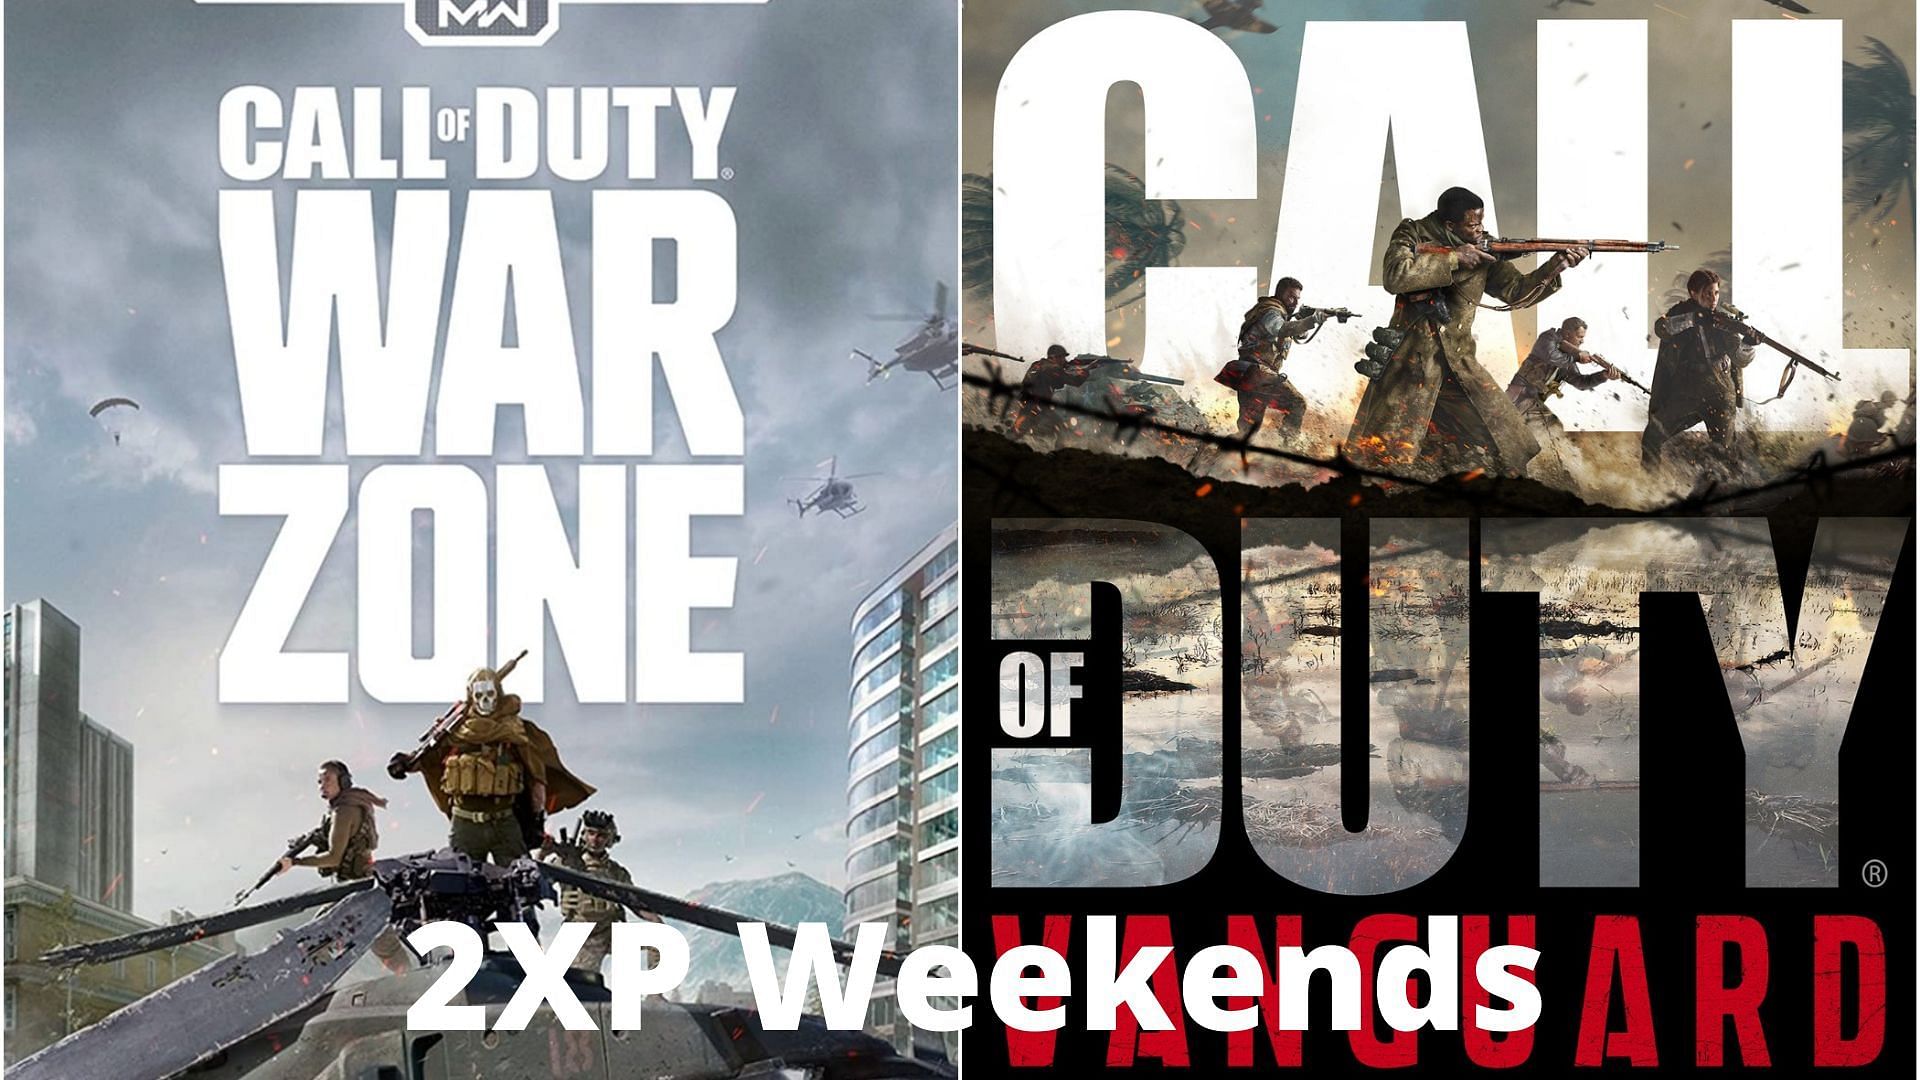 Double XP periods are coming up for both COD games (Image via Sportskeeda)